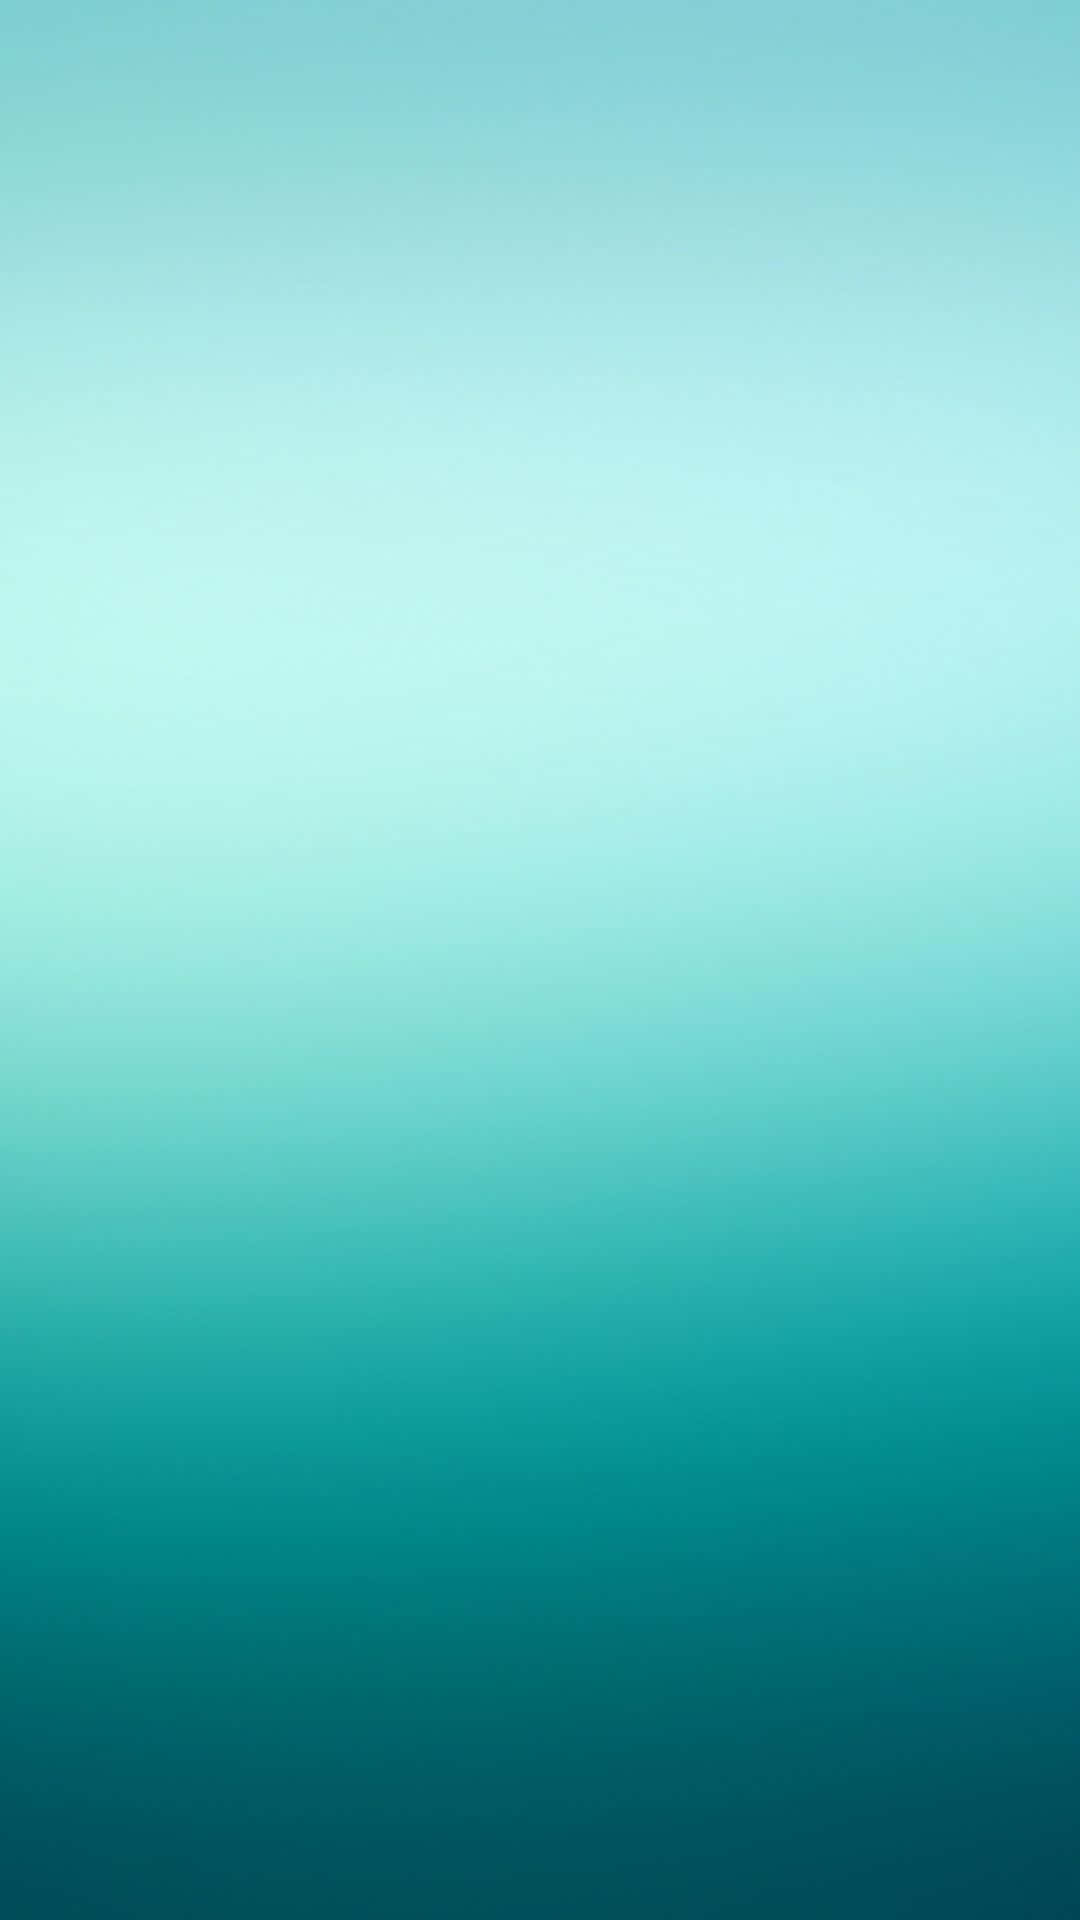 A Blue And Green Abstract Background Wallpaper